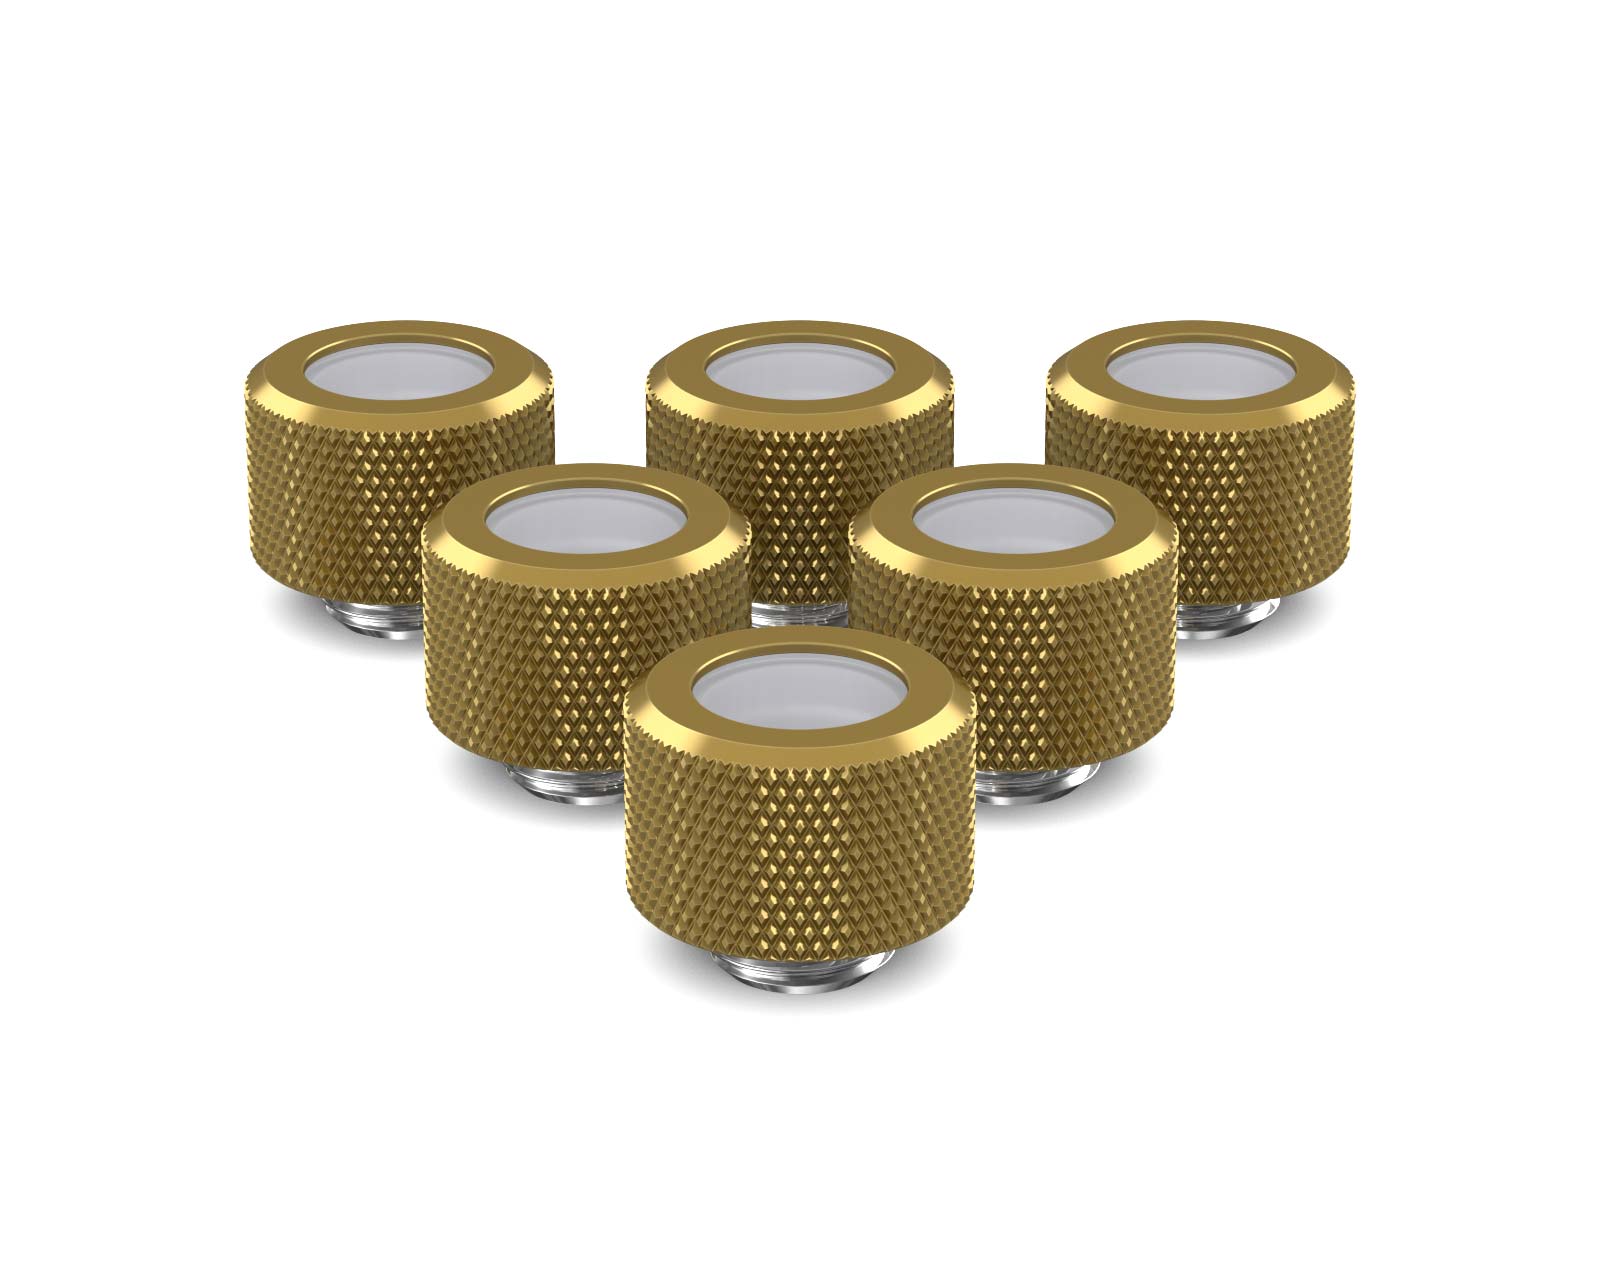 PrimoChill 14mm OD Rigid SX Fitting - 6 Pack - PrimoChill - KEEPING IT COOL Candy Gold